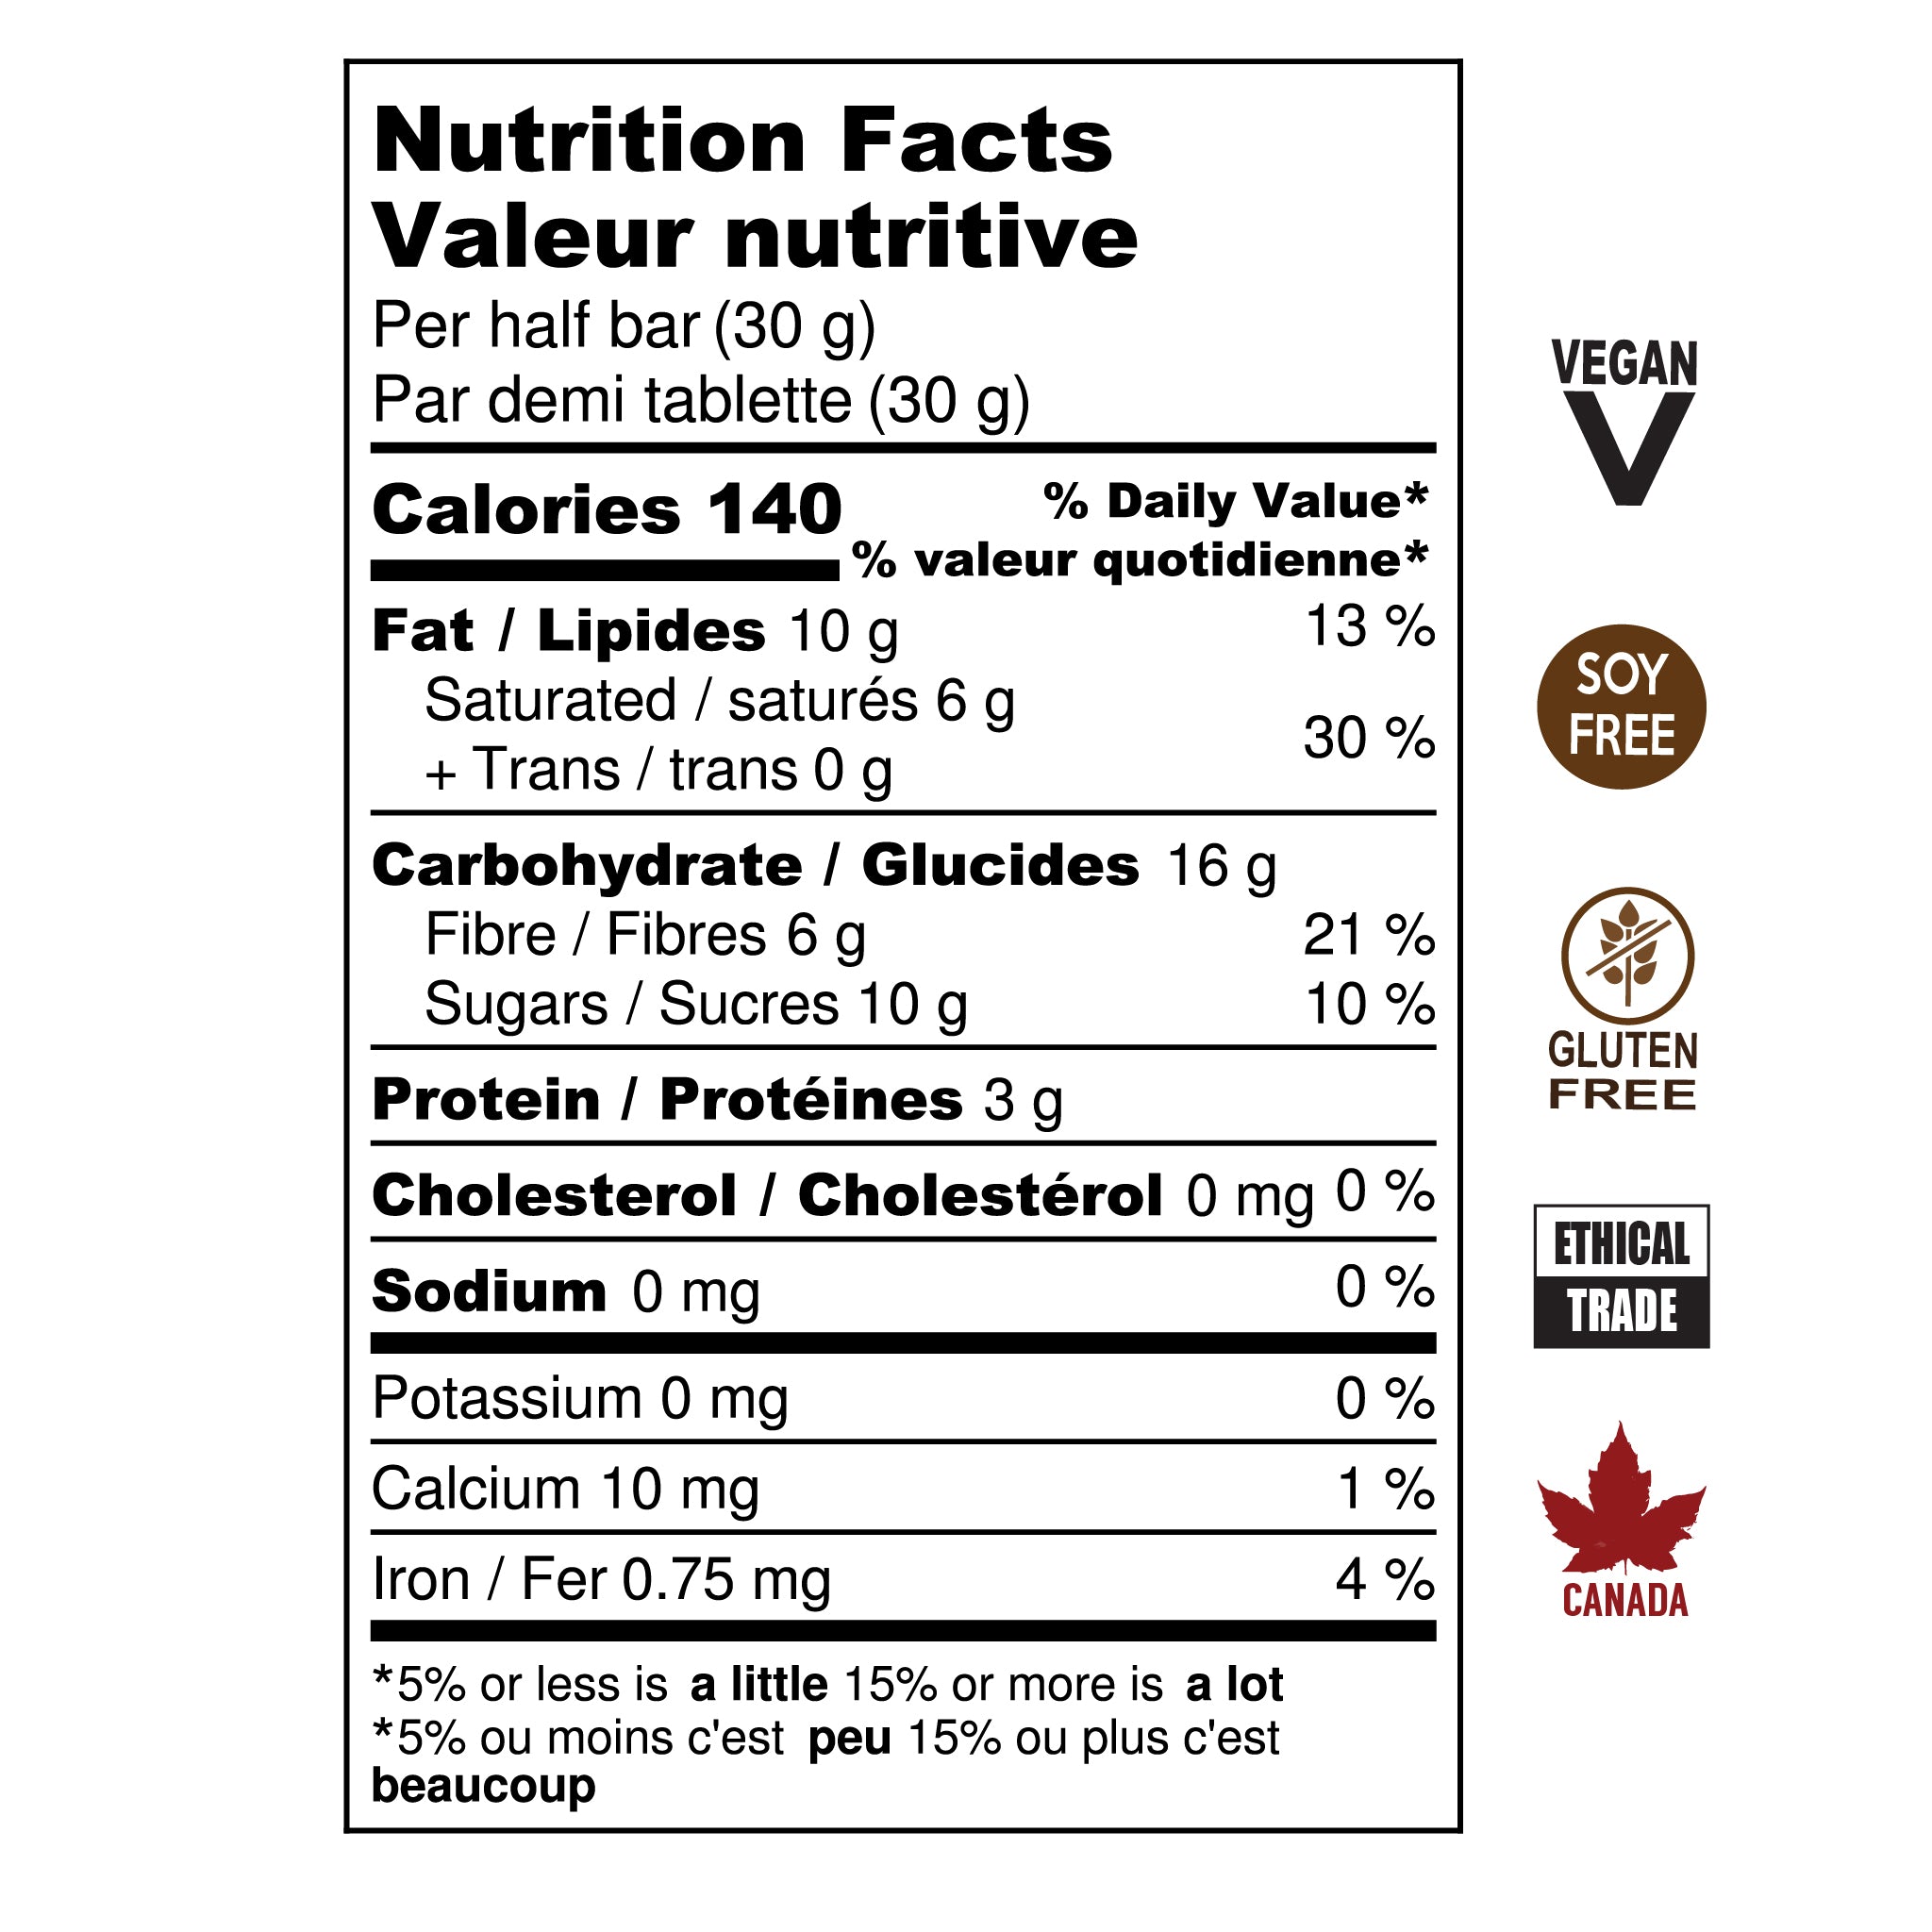 Nutrition Facts for Peppermint Chocolate Bar. Vegan, Soy Free, Gluten Free, Ethical Trade, Made in Canada.